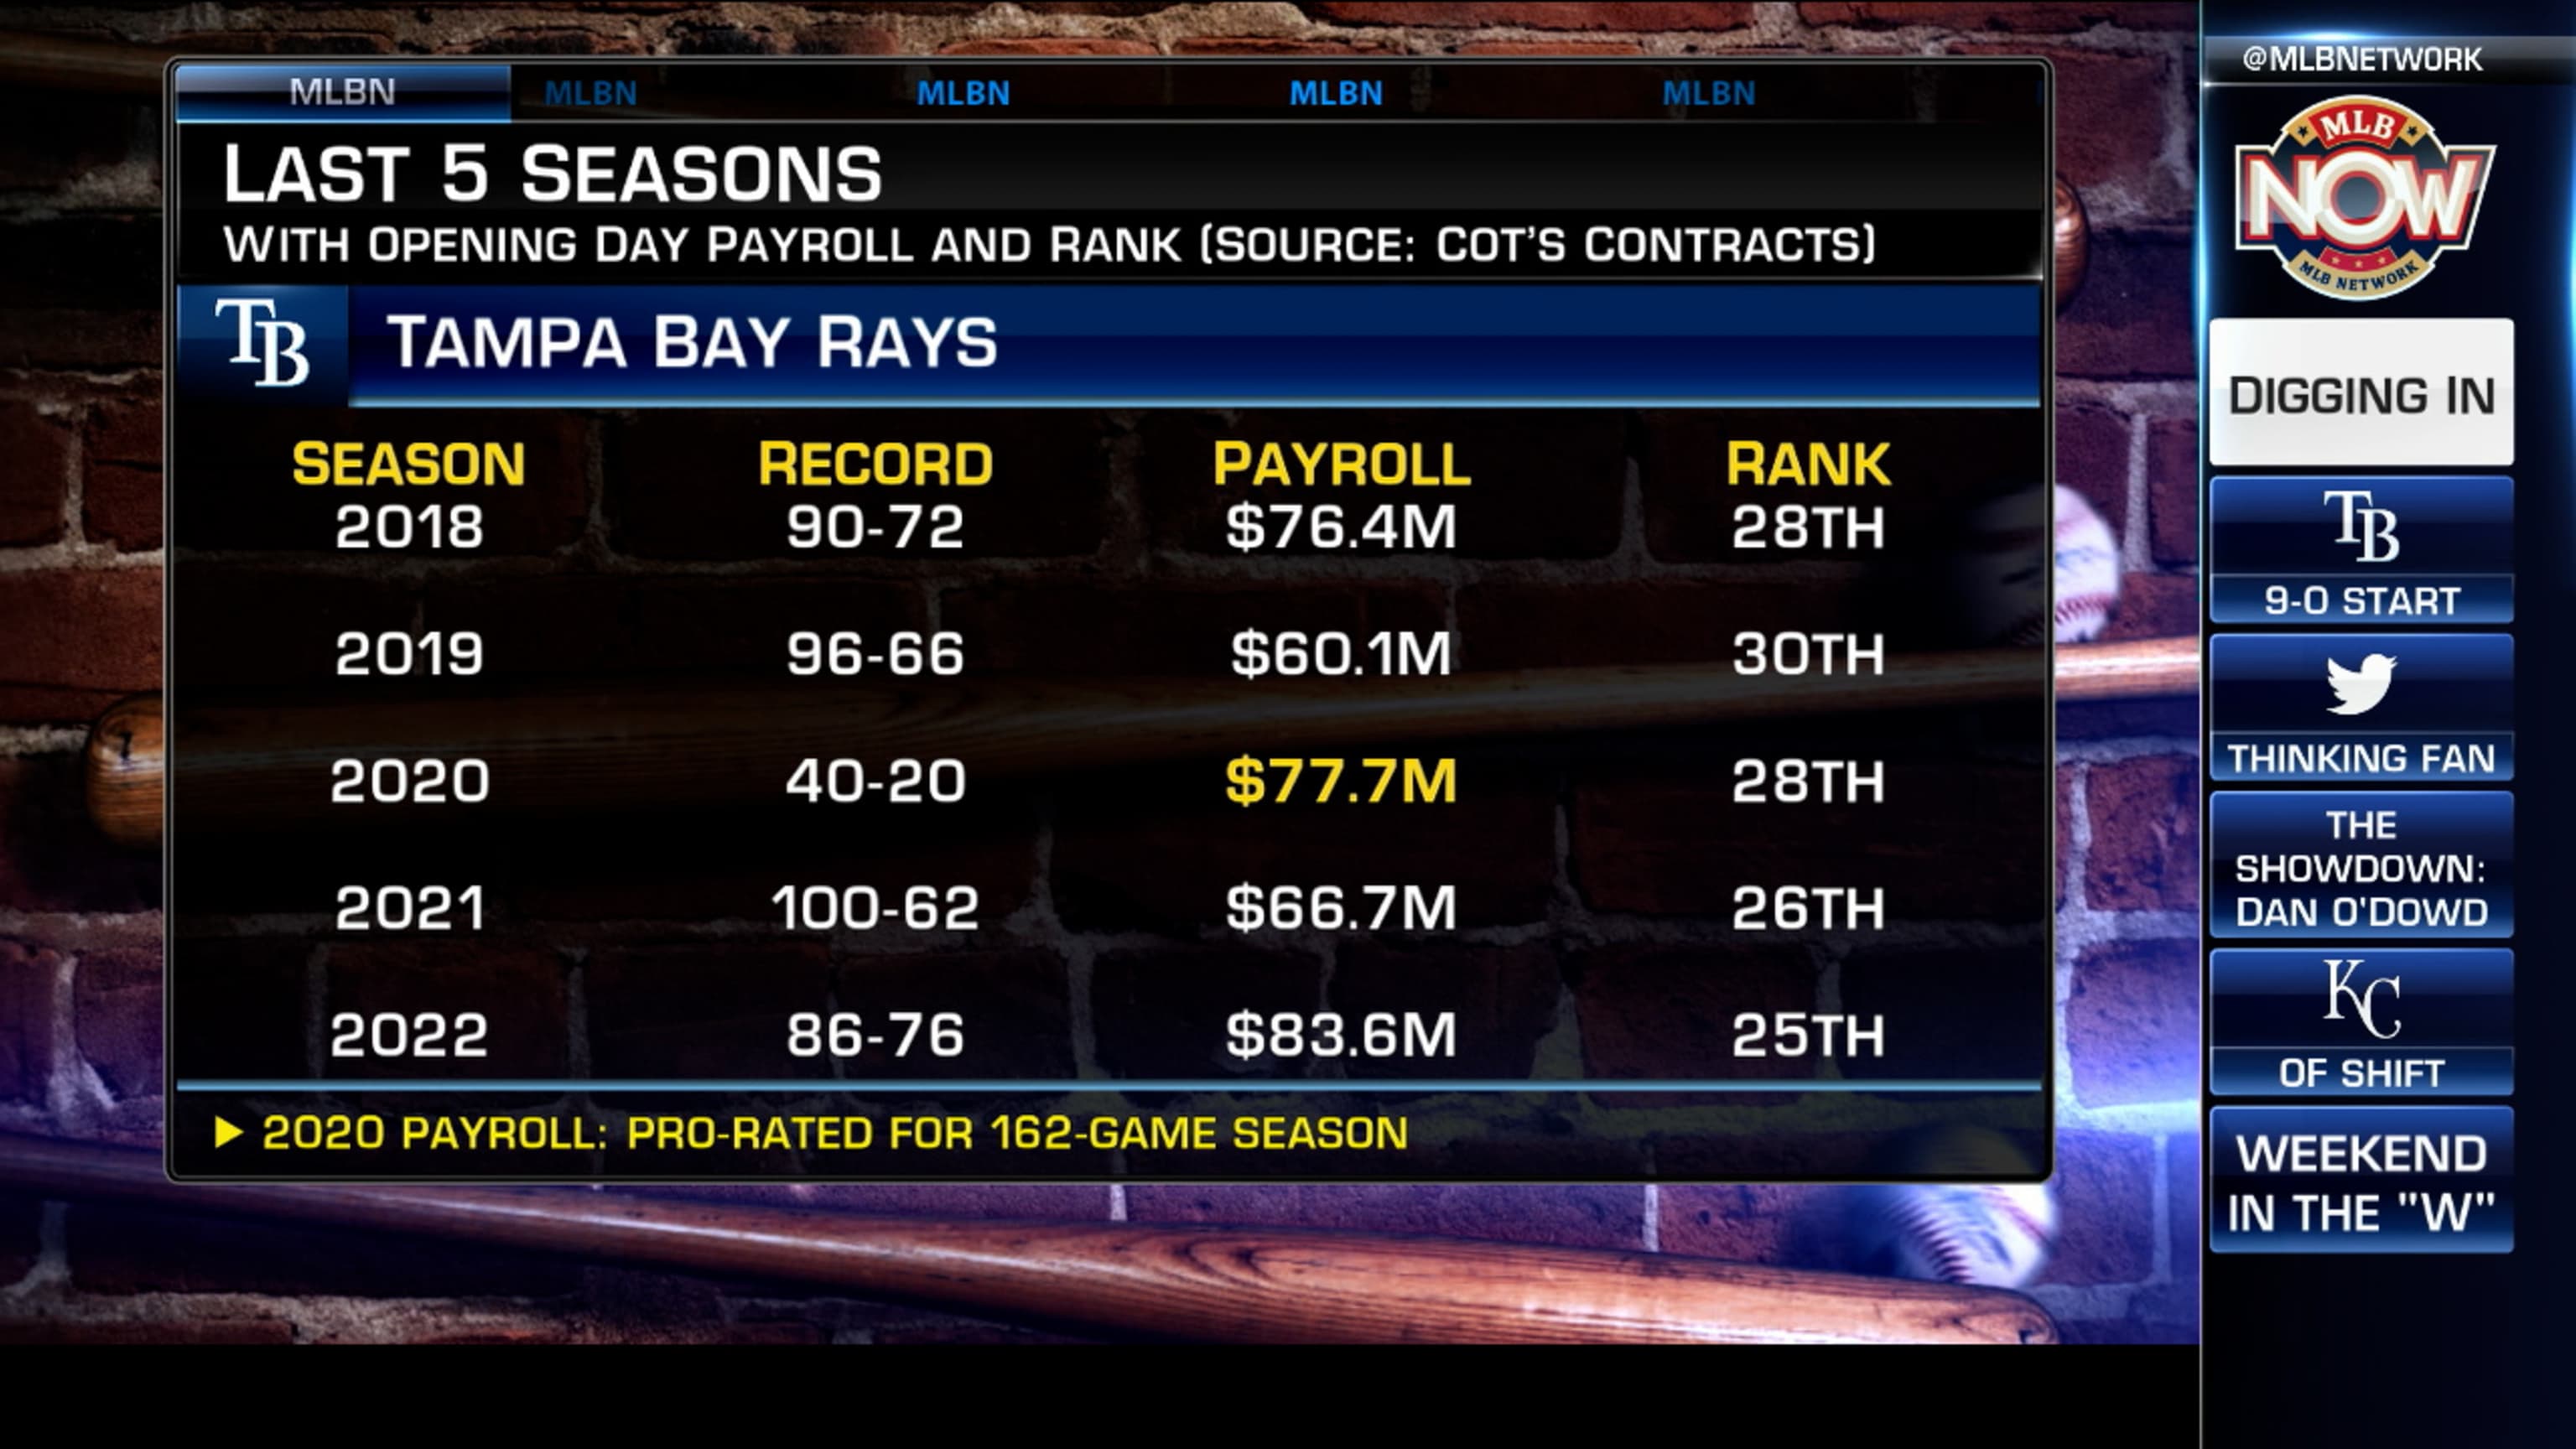 What's fueling the Rays' success?